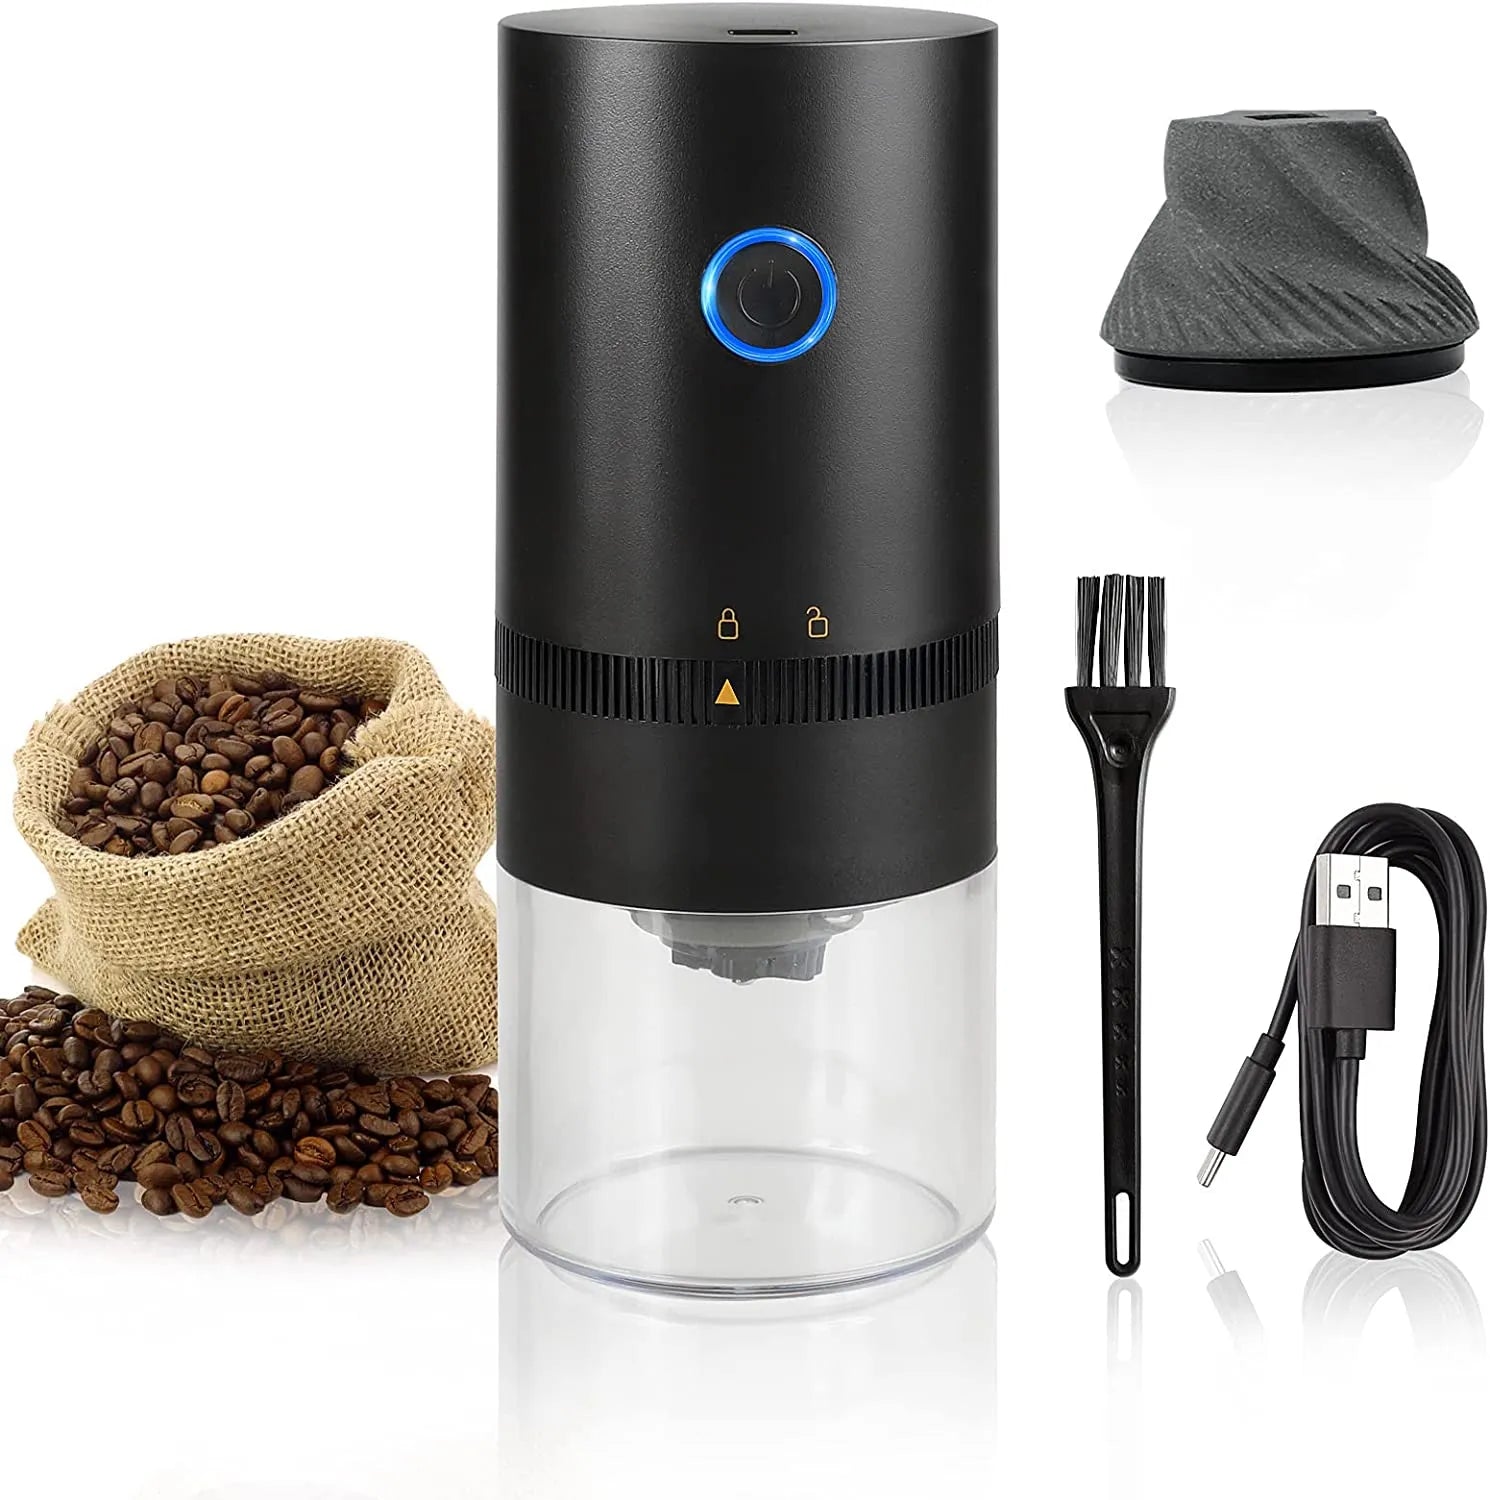 Cordless Portable Electric Coffee Grinder TYPE-C USB Charge Profession  Ceramic Grinding Core Coffee Beans Grinder